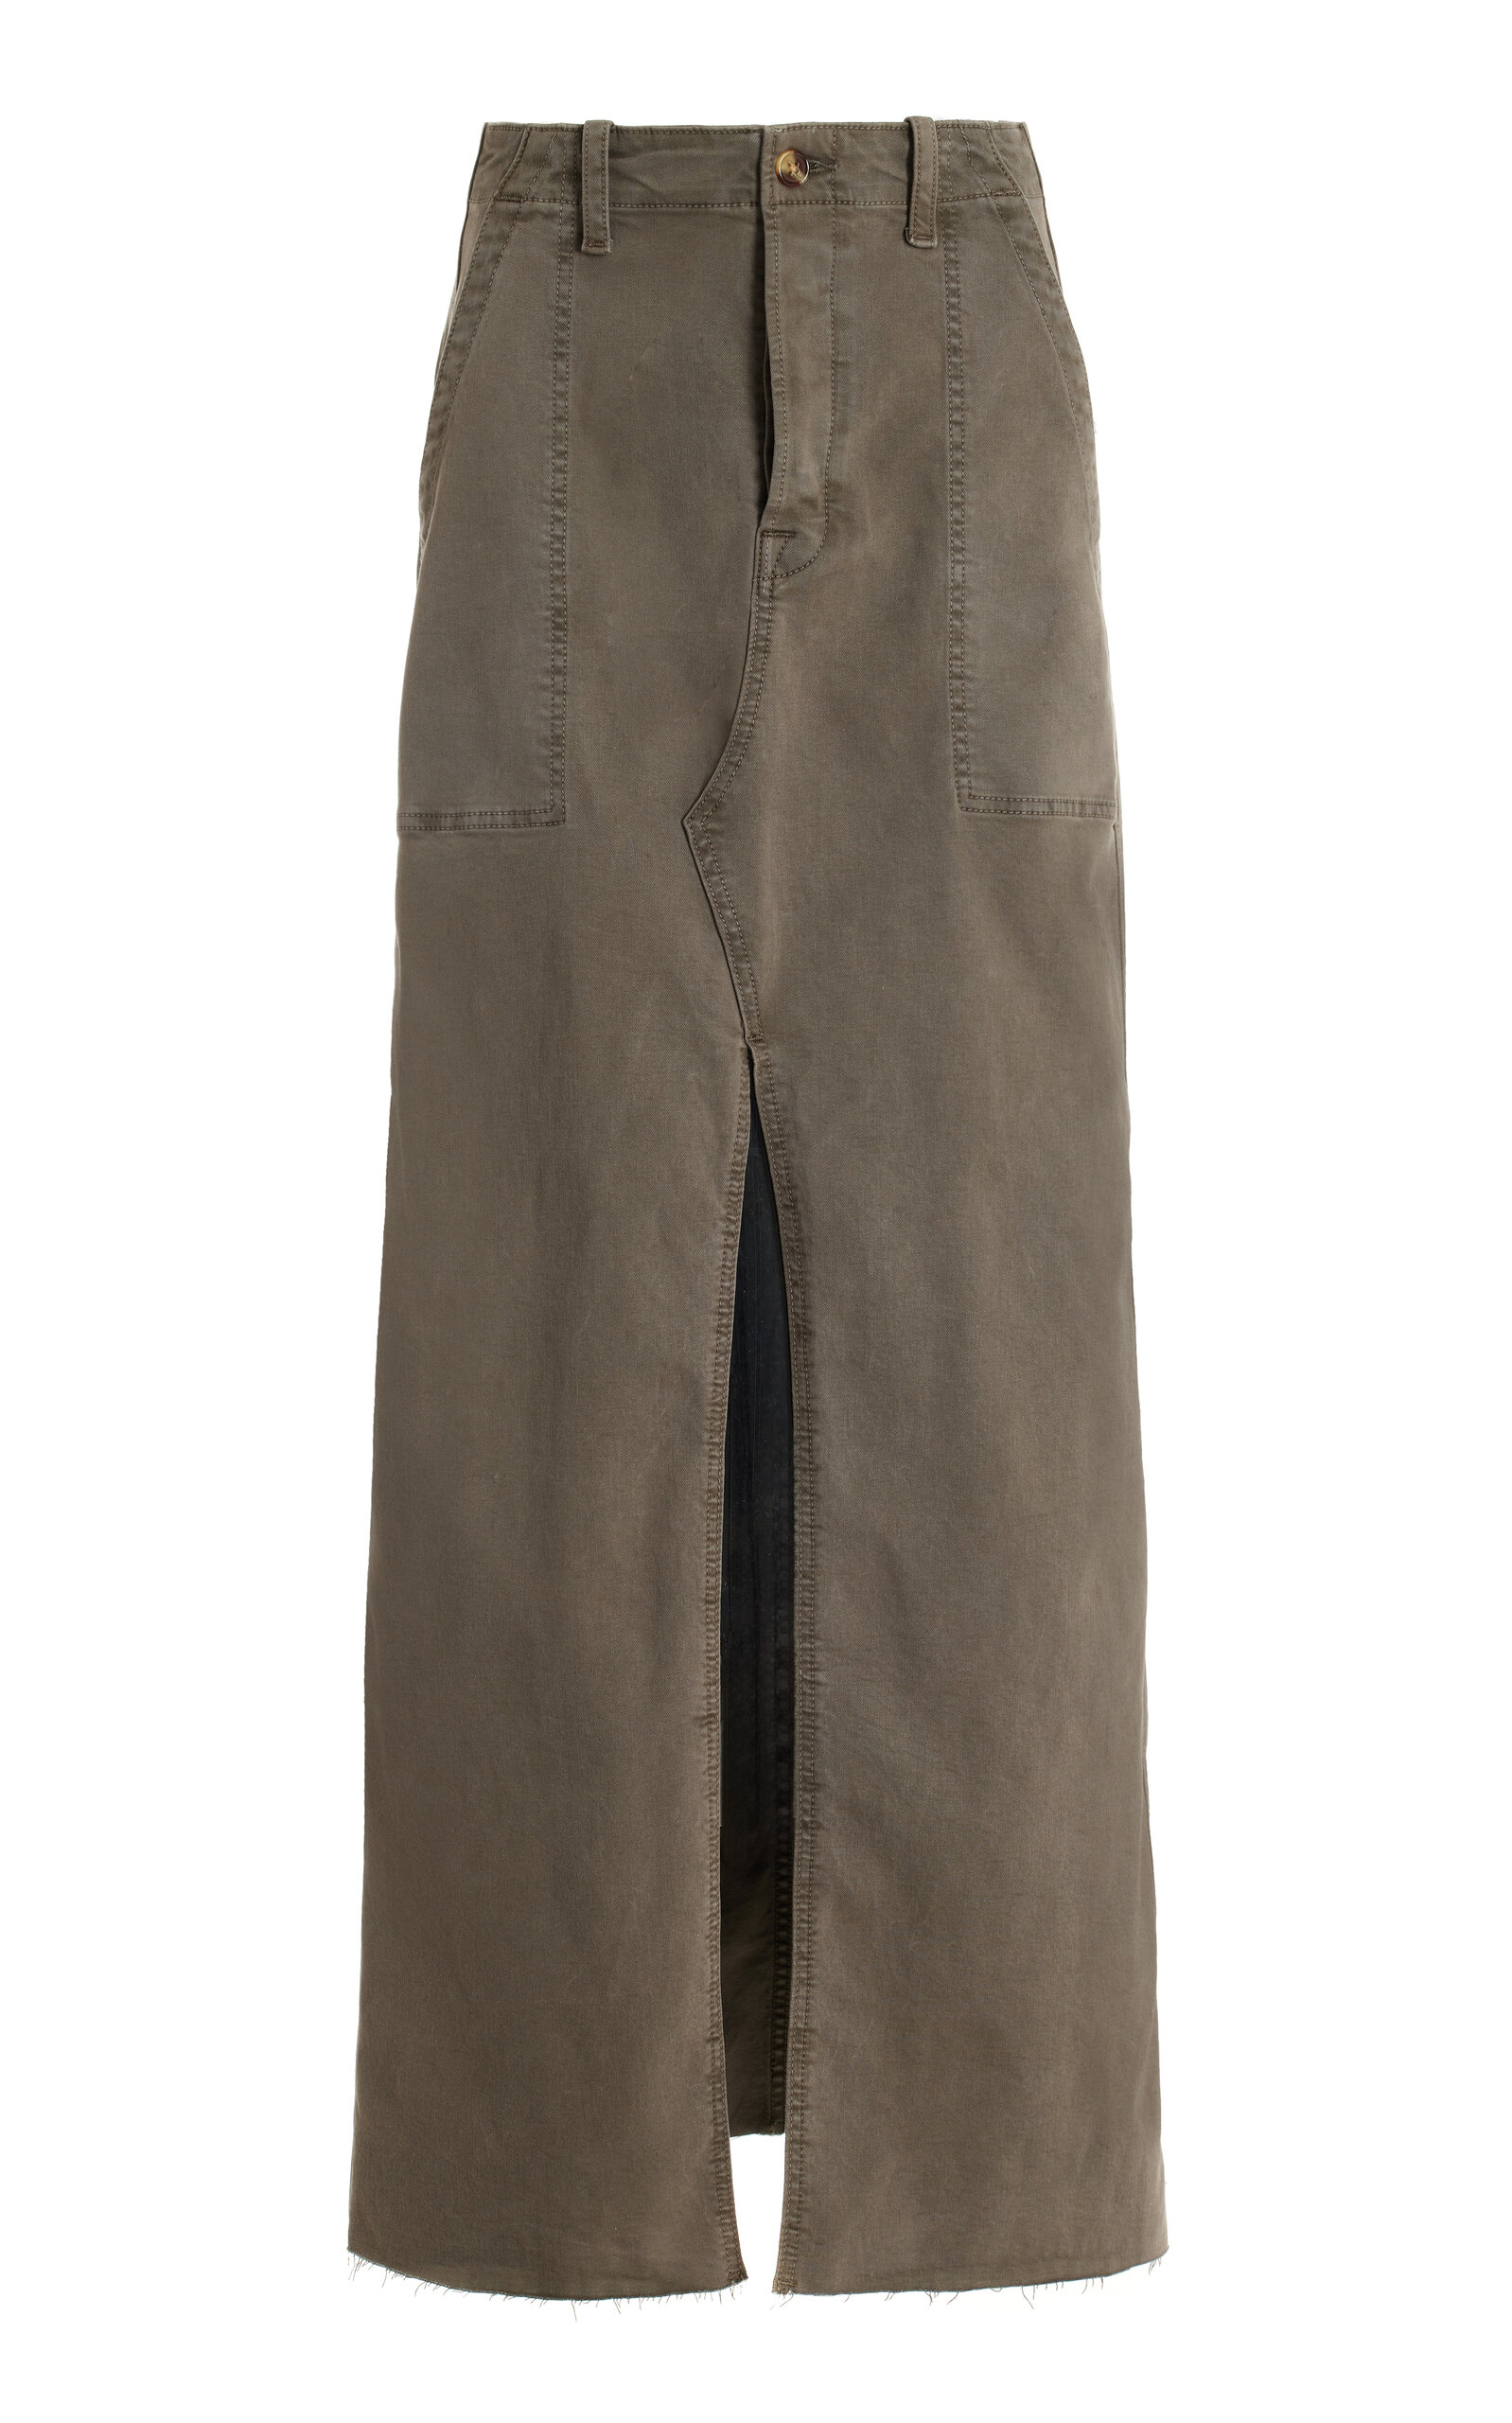 The Sadie High-Waisted Cotton-Blend Utility Maxi Skirt